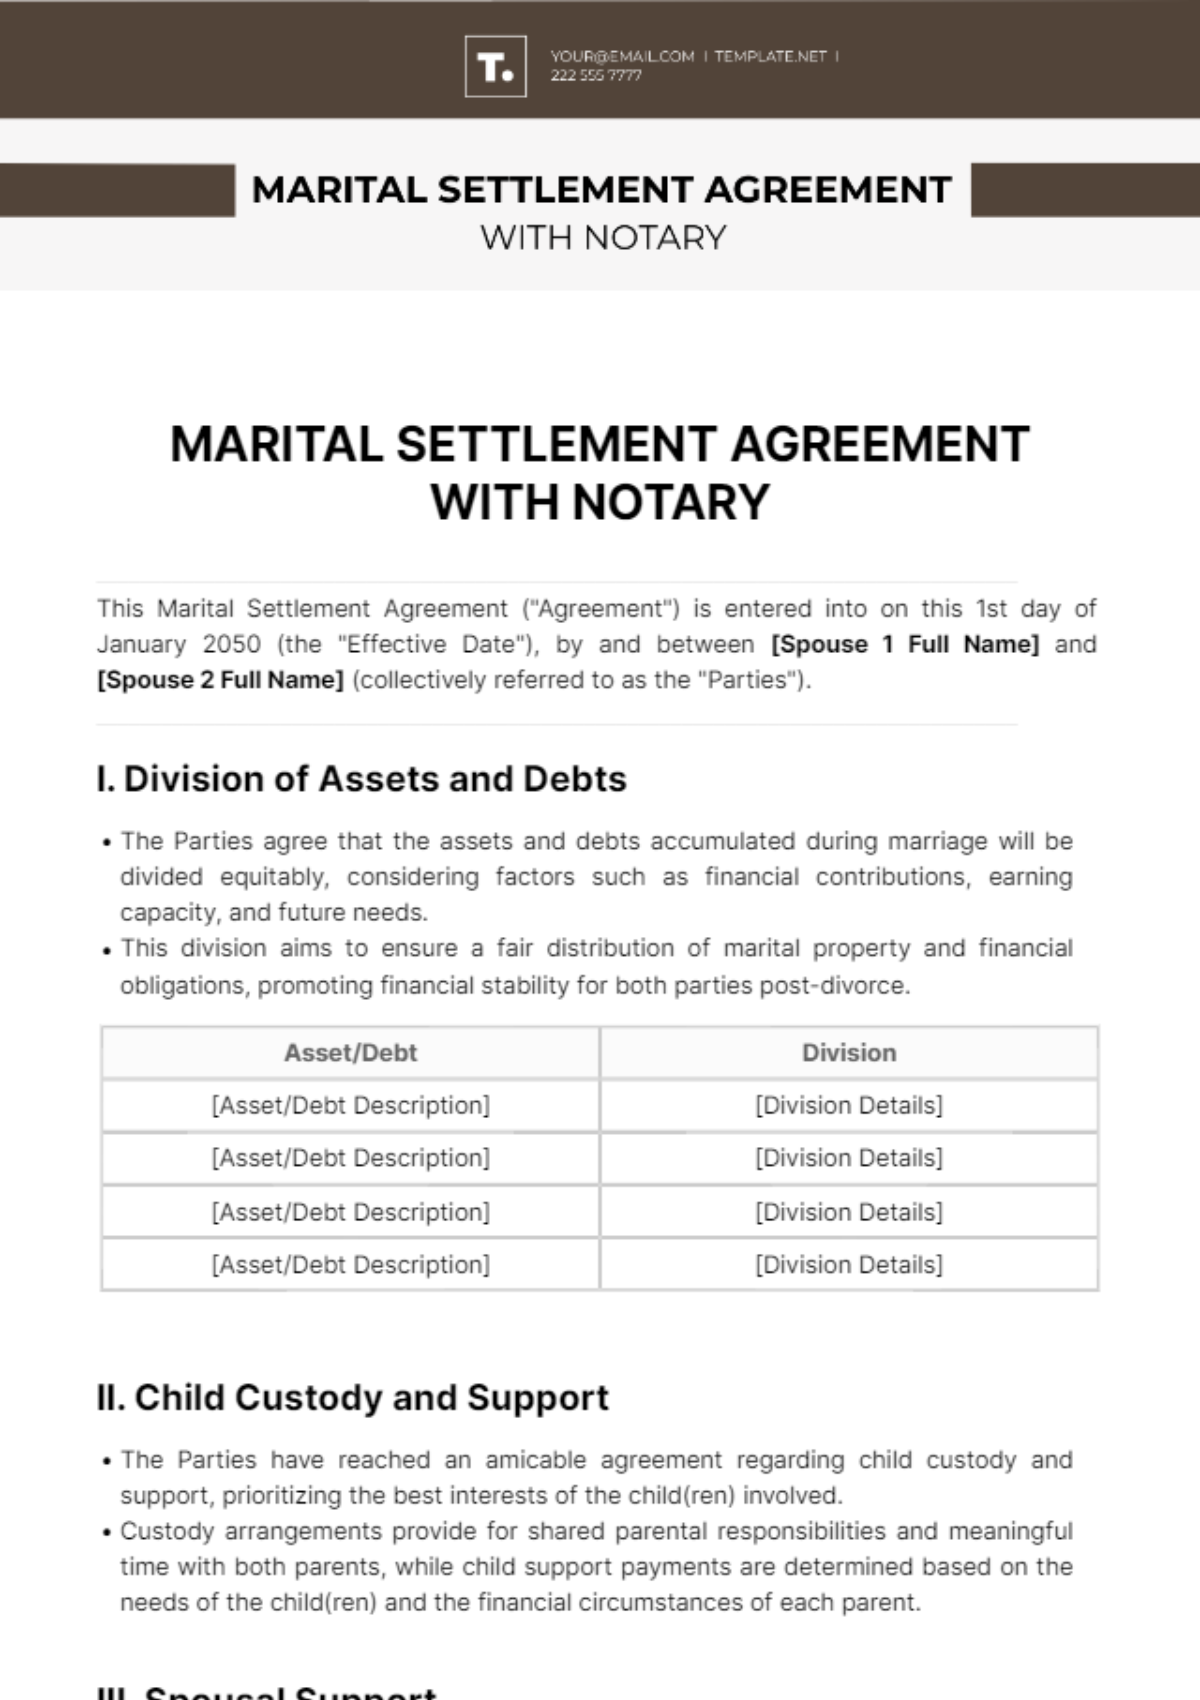 Free Marital Settlement Agreement With Notary Template